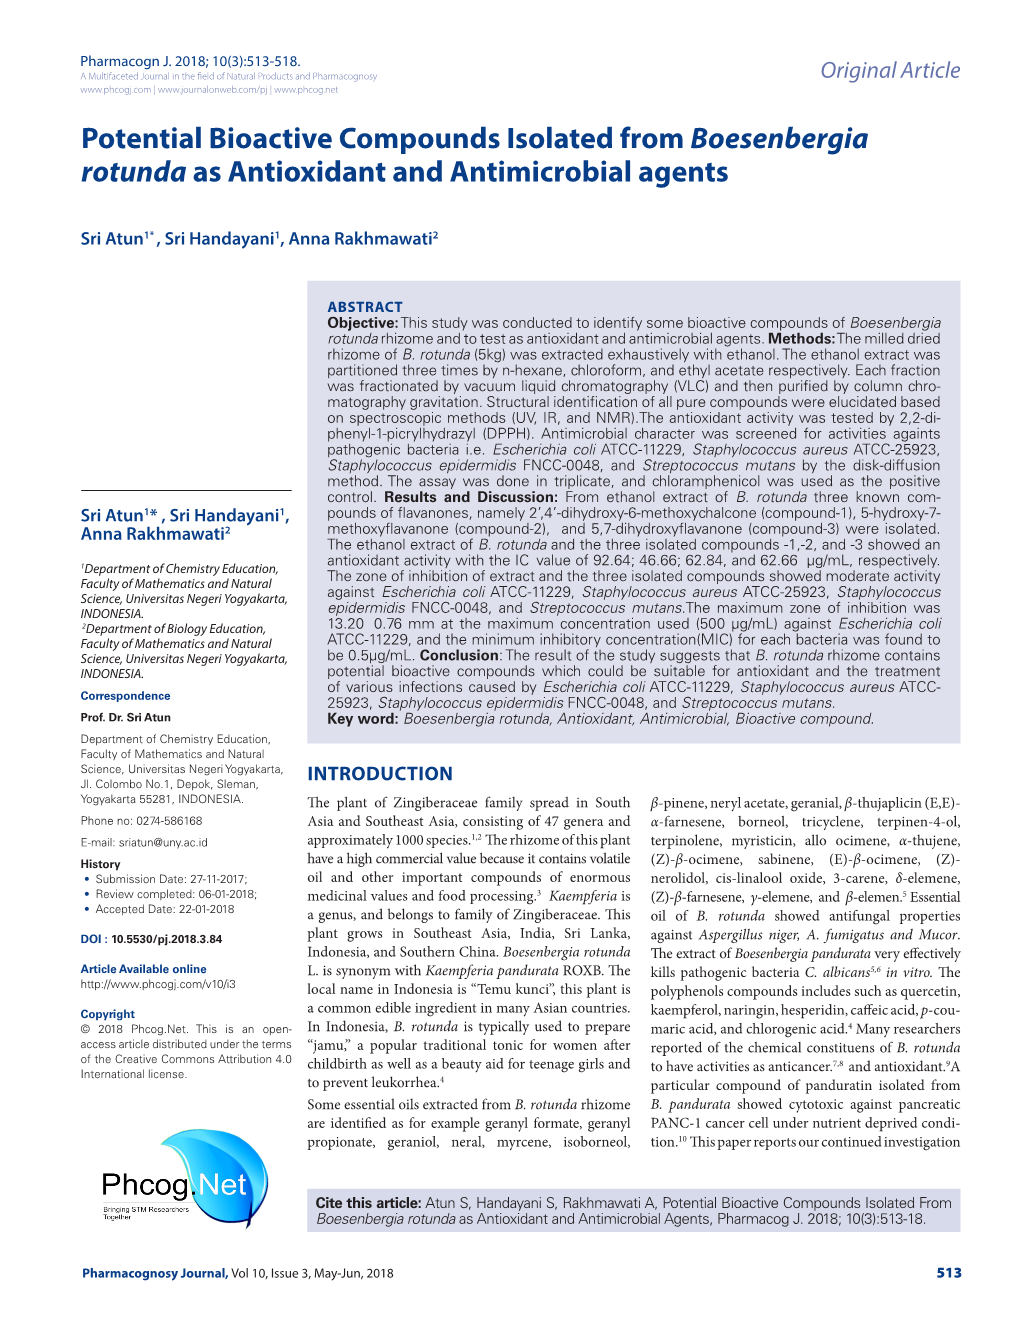 Potential Bioactive Compounds Isolated from Boesenbergia Rotunda As Antioxidant and Antimicrobial Agents